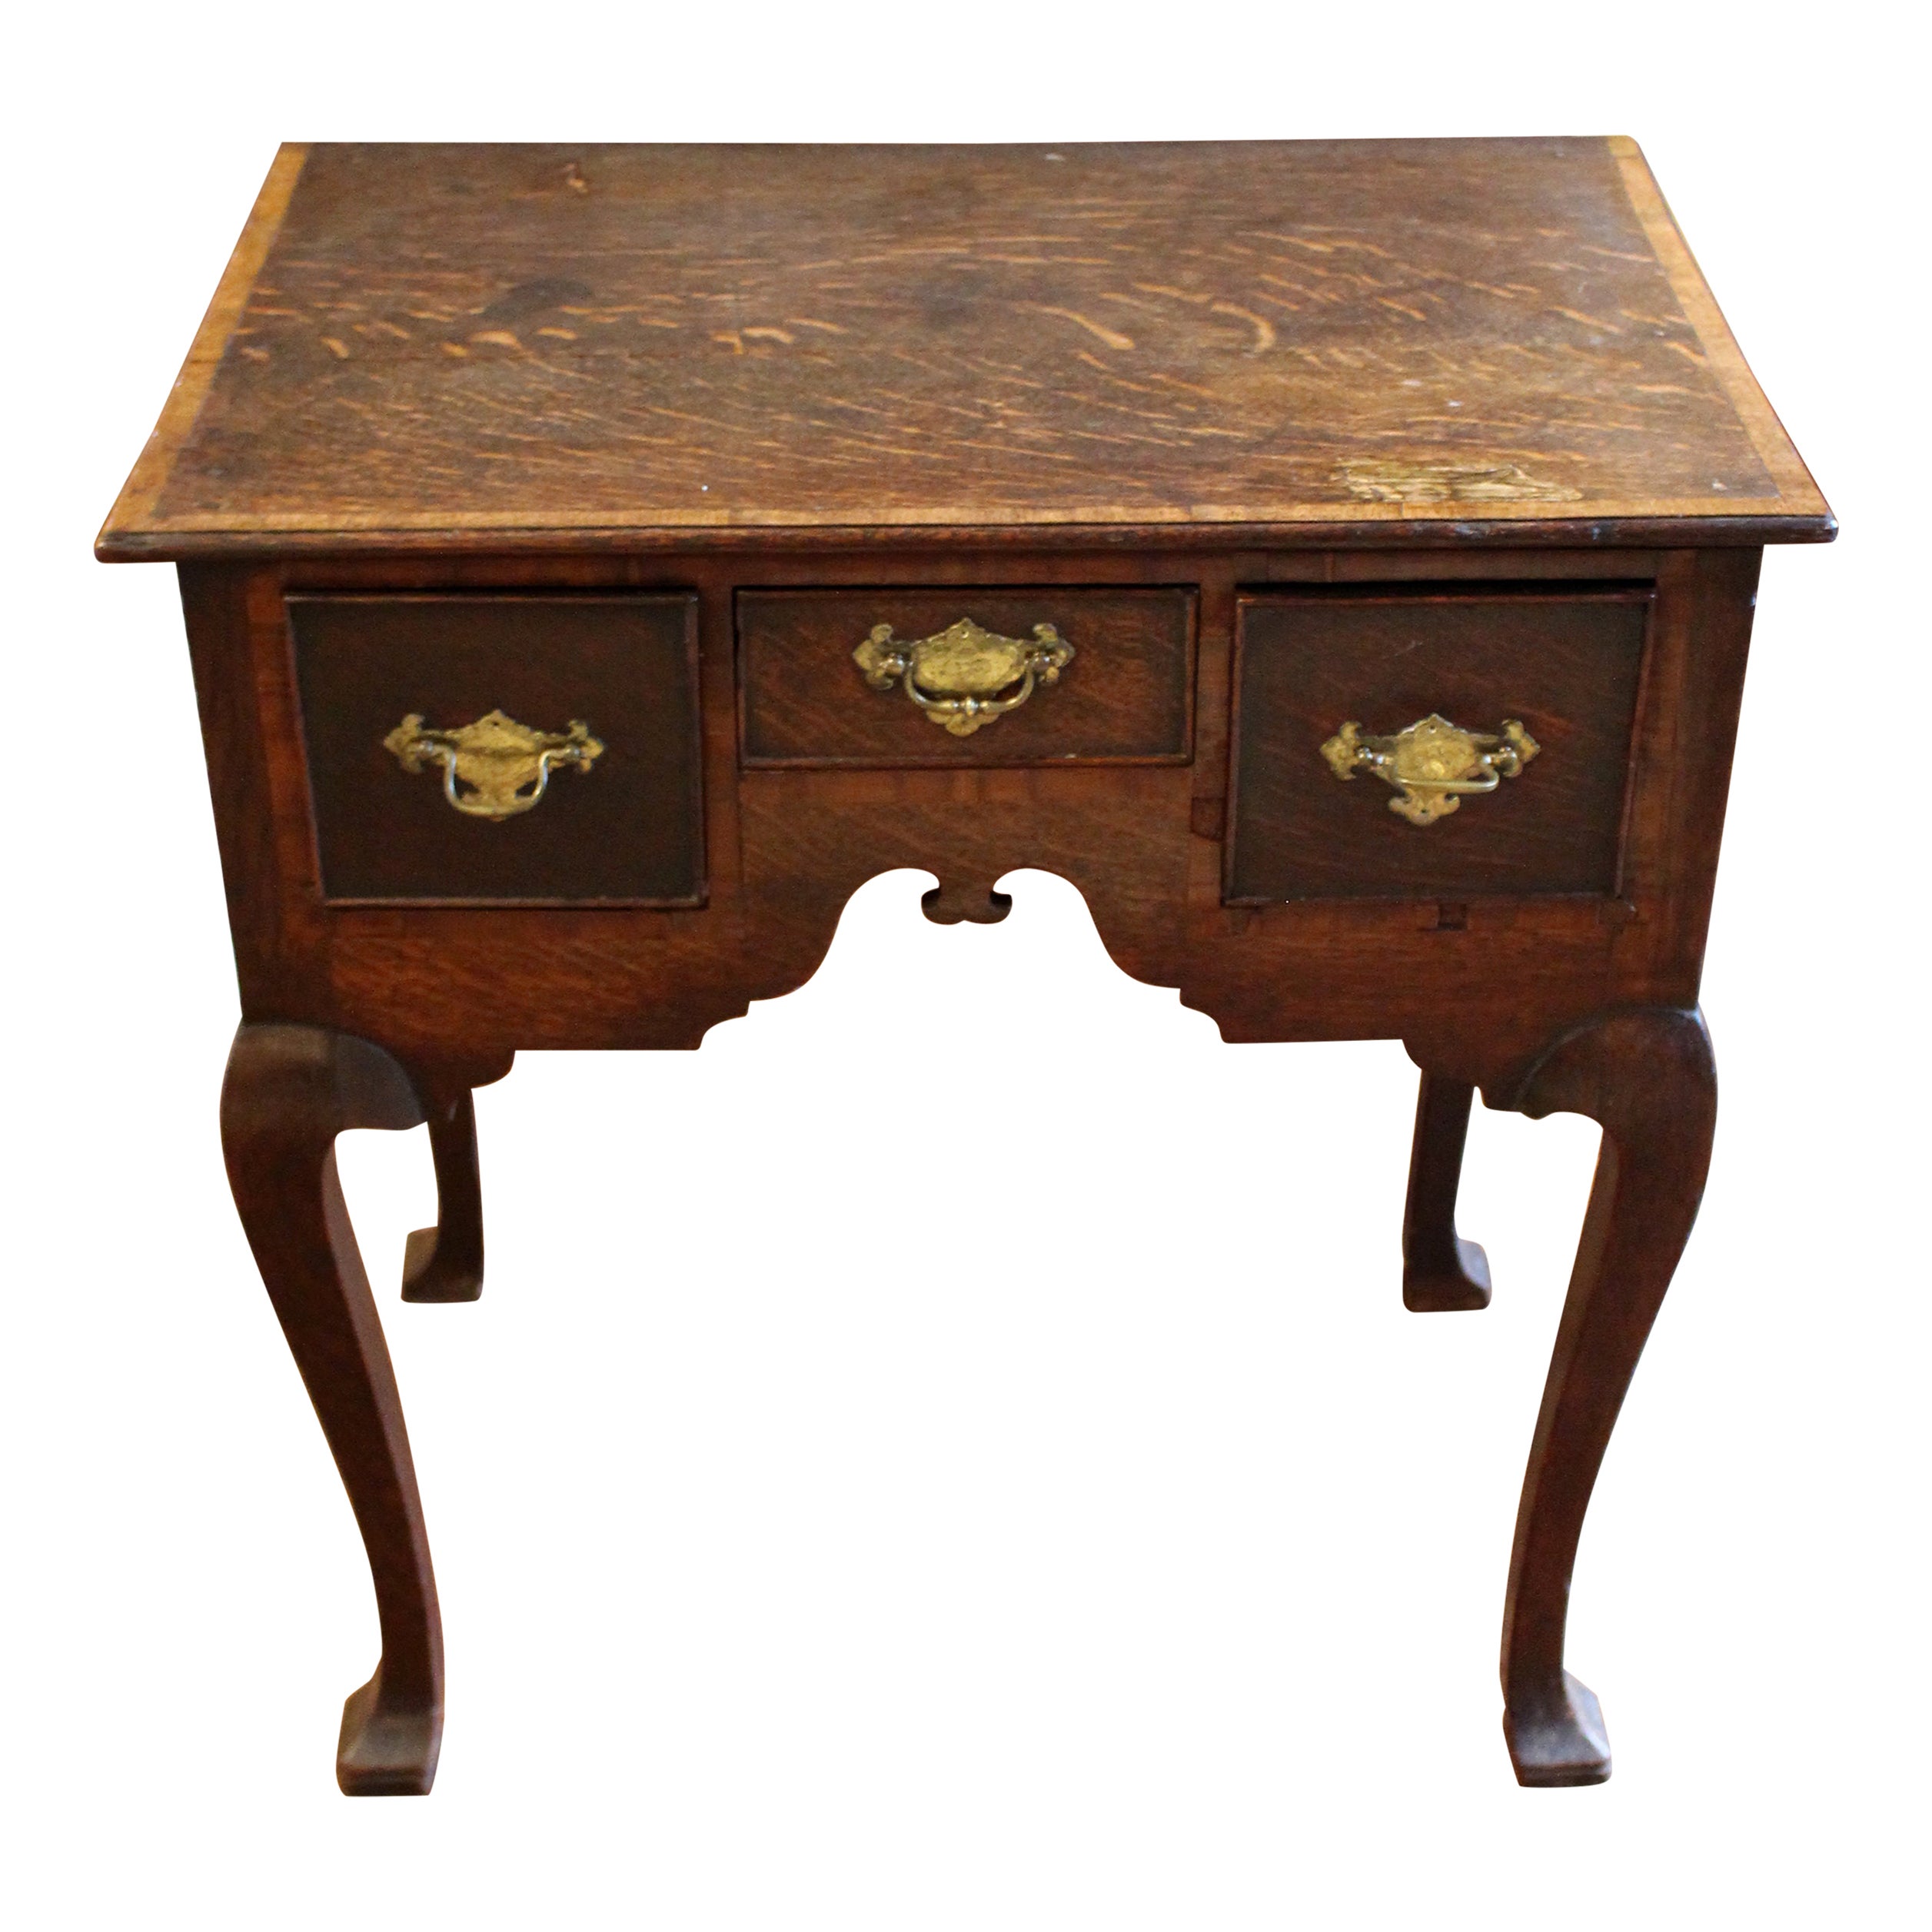 Circa 1730 English Country Oak Lowboy or Dressing Table For Sale